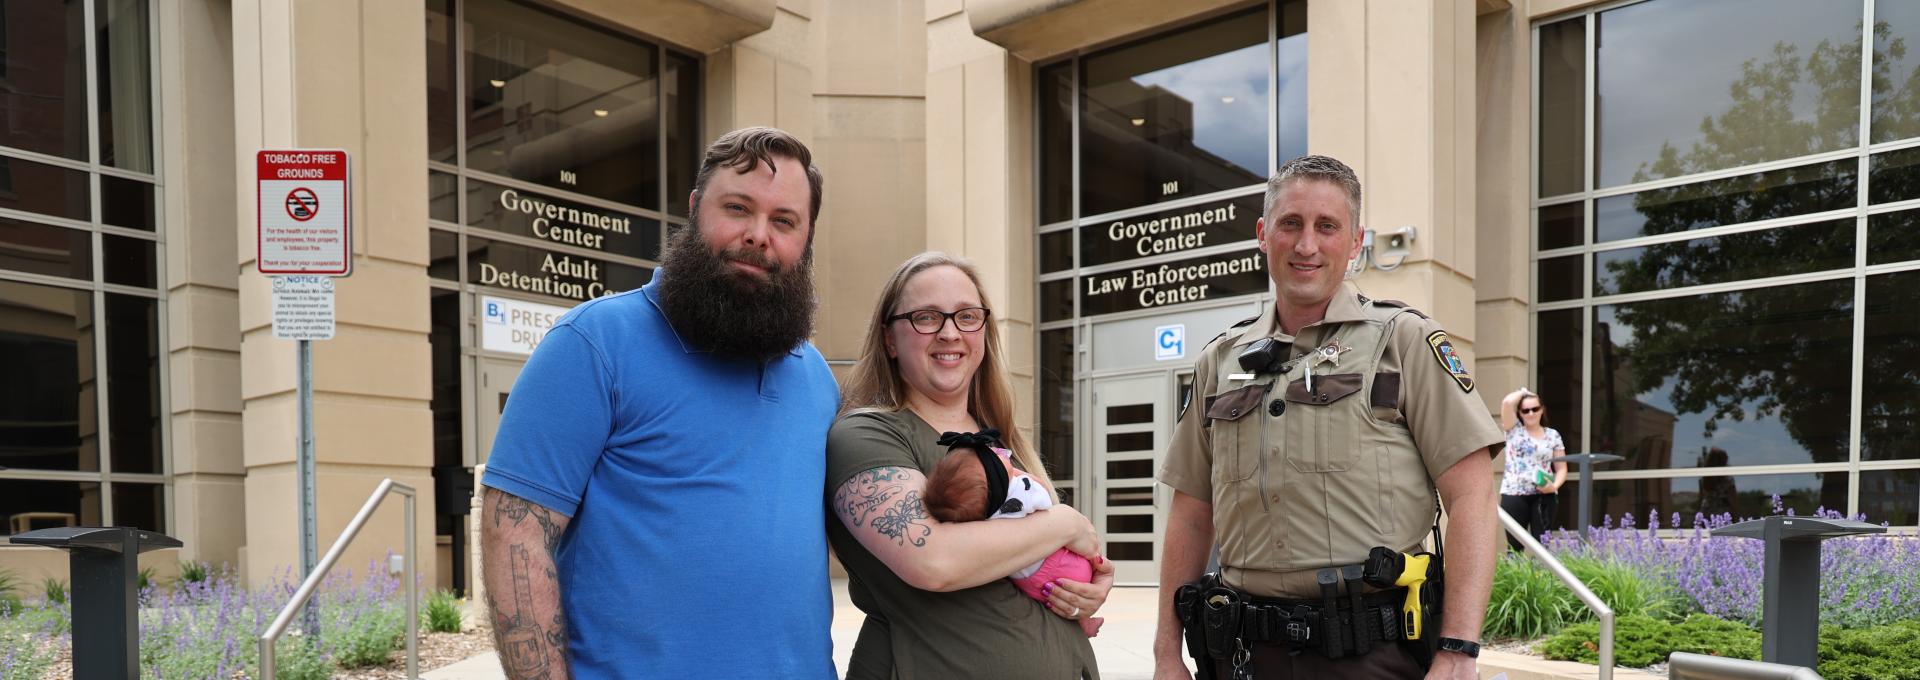 Deputy Luke Leichtnam poses with family who he helped deliver baby